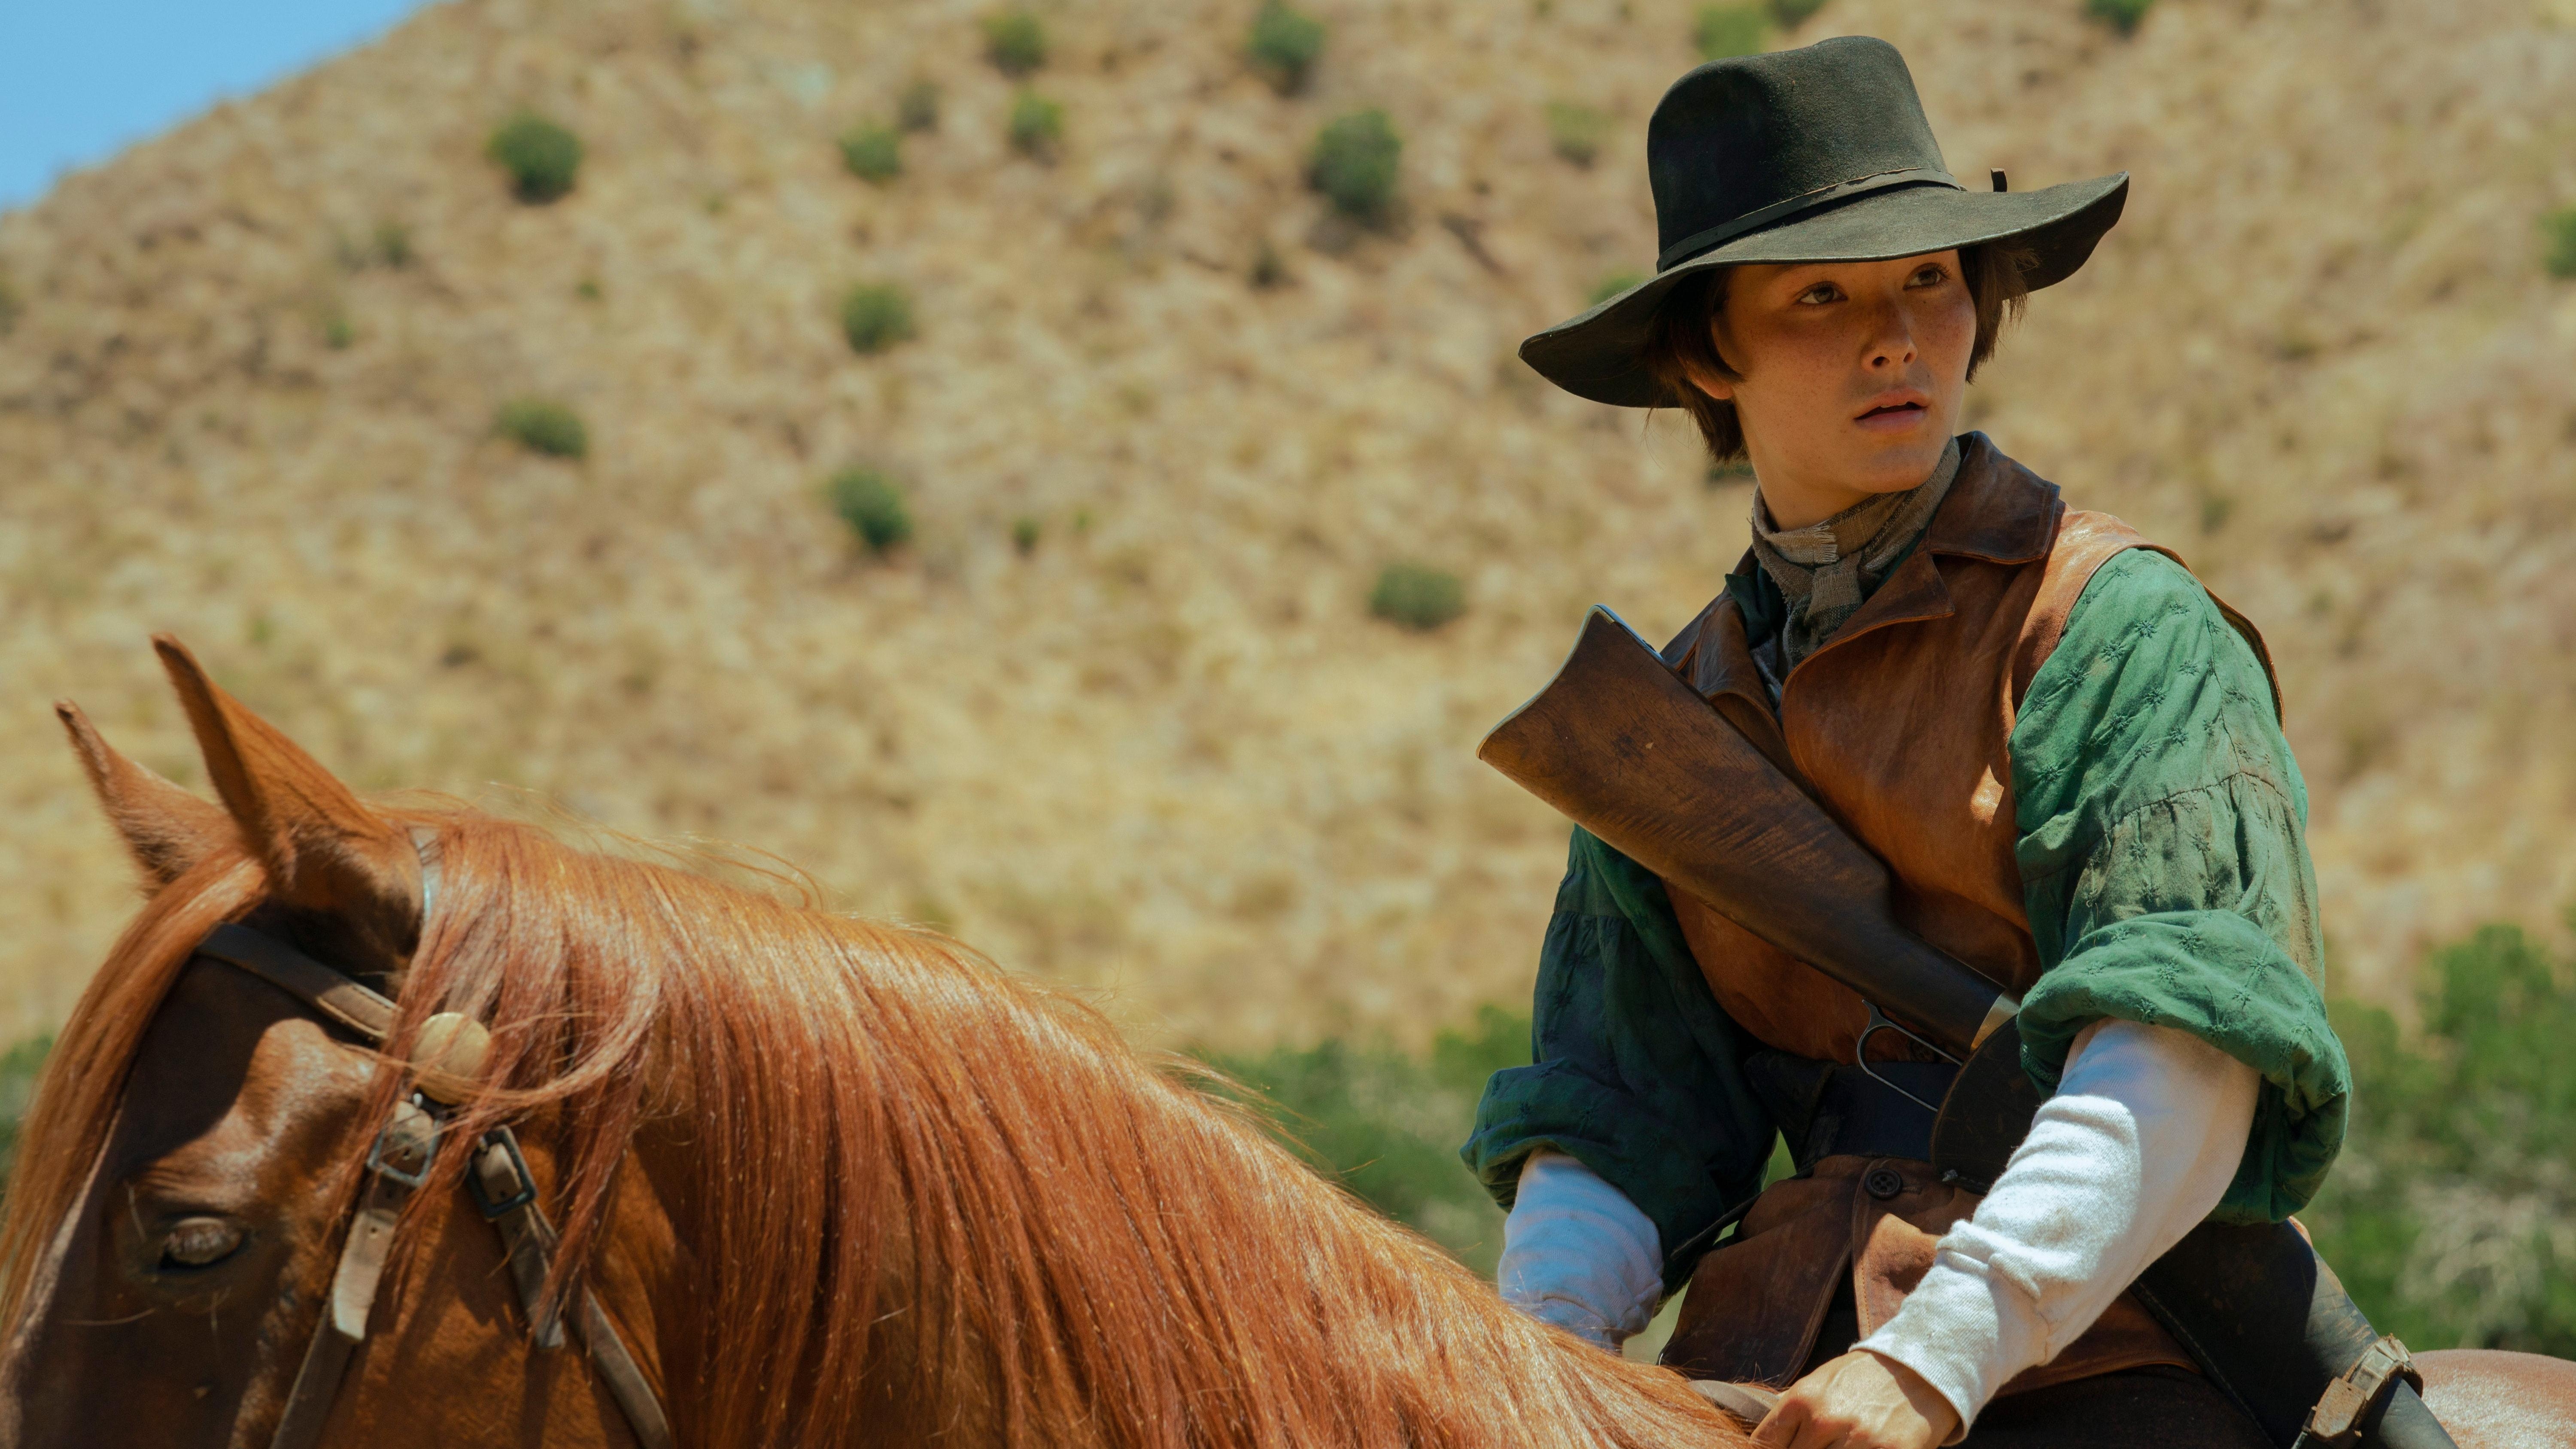 8. Episode eight: “The Girl Who Loved Horses”